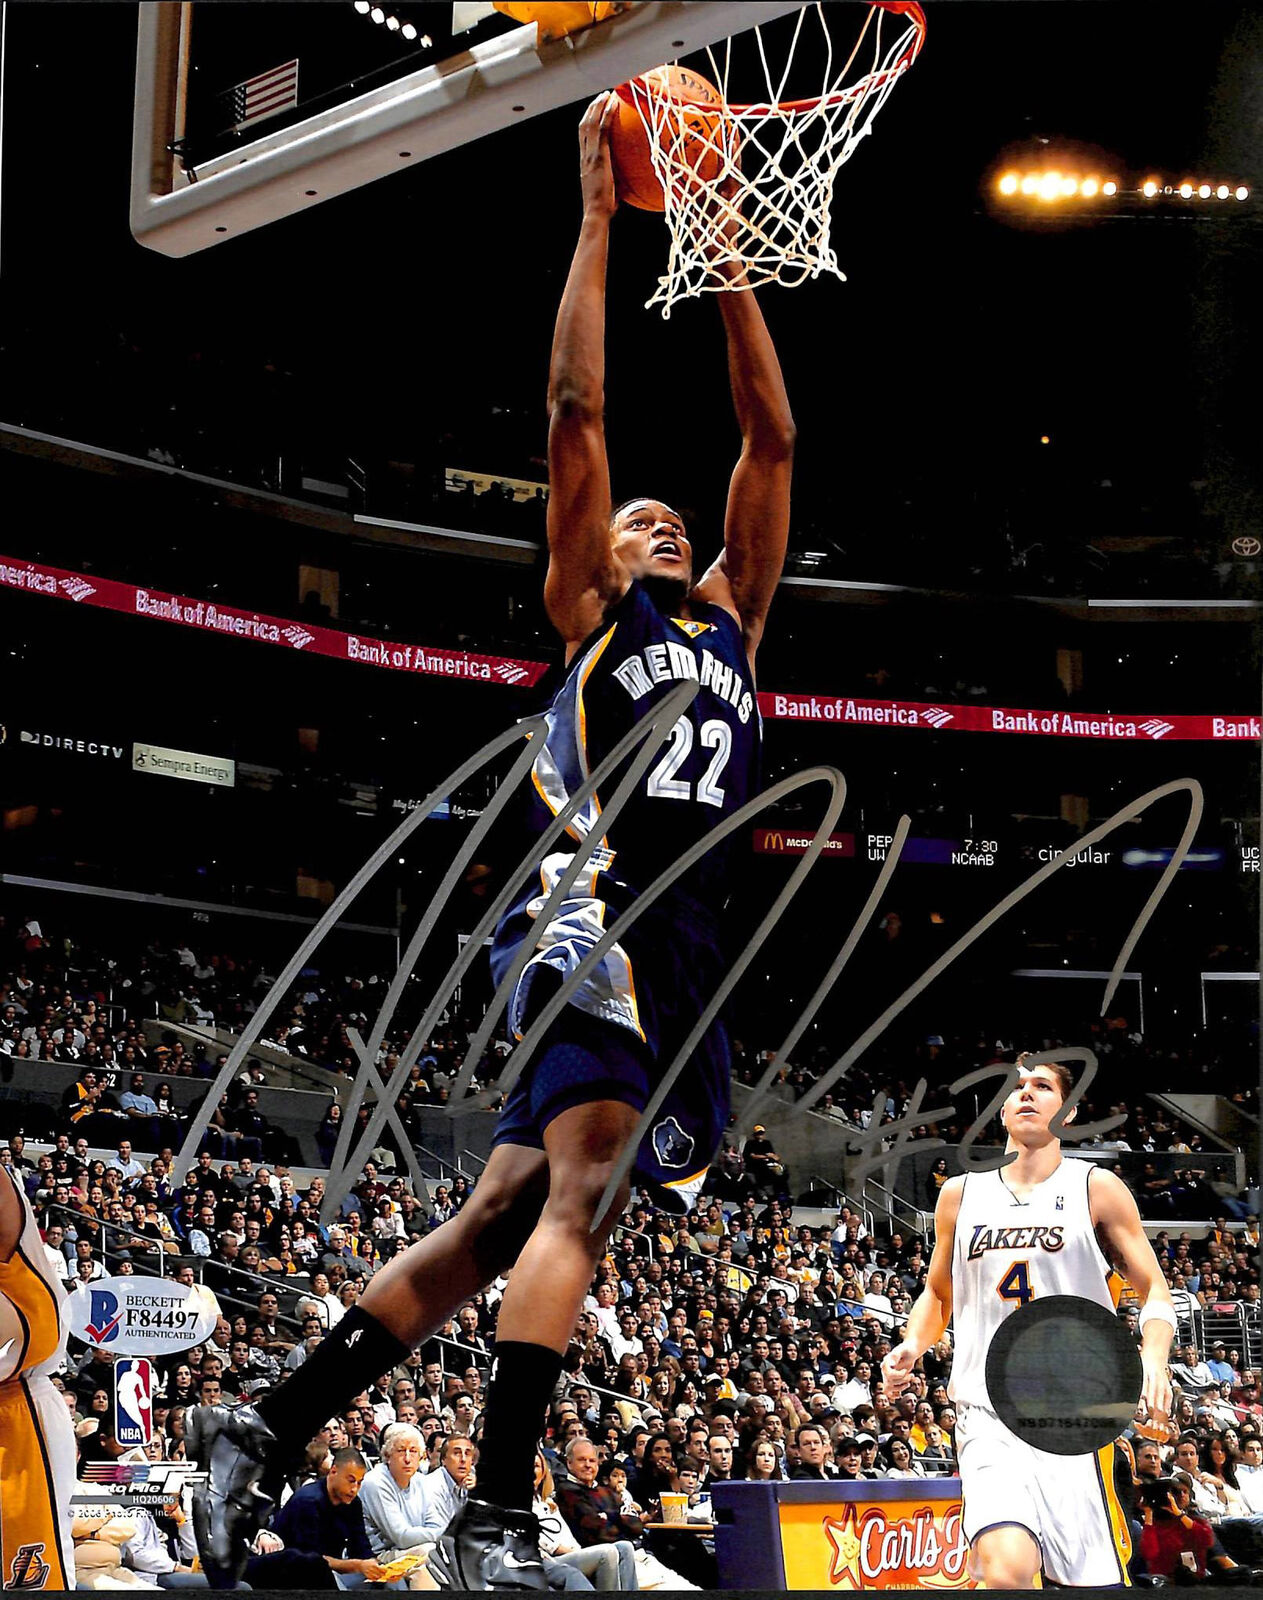 Grizzlies Rudy Gay Authentic Signed 8x10 Photo Poster painting Autographed BAS #F84497